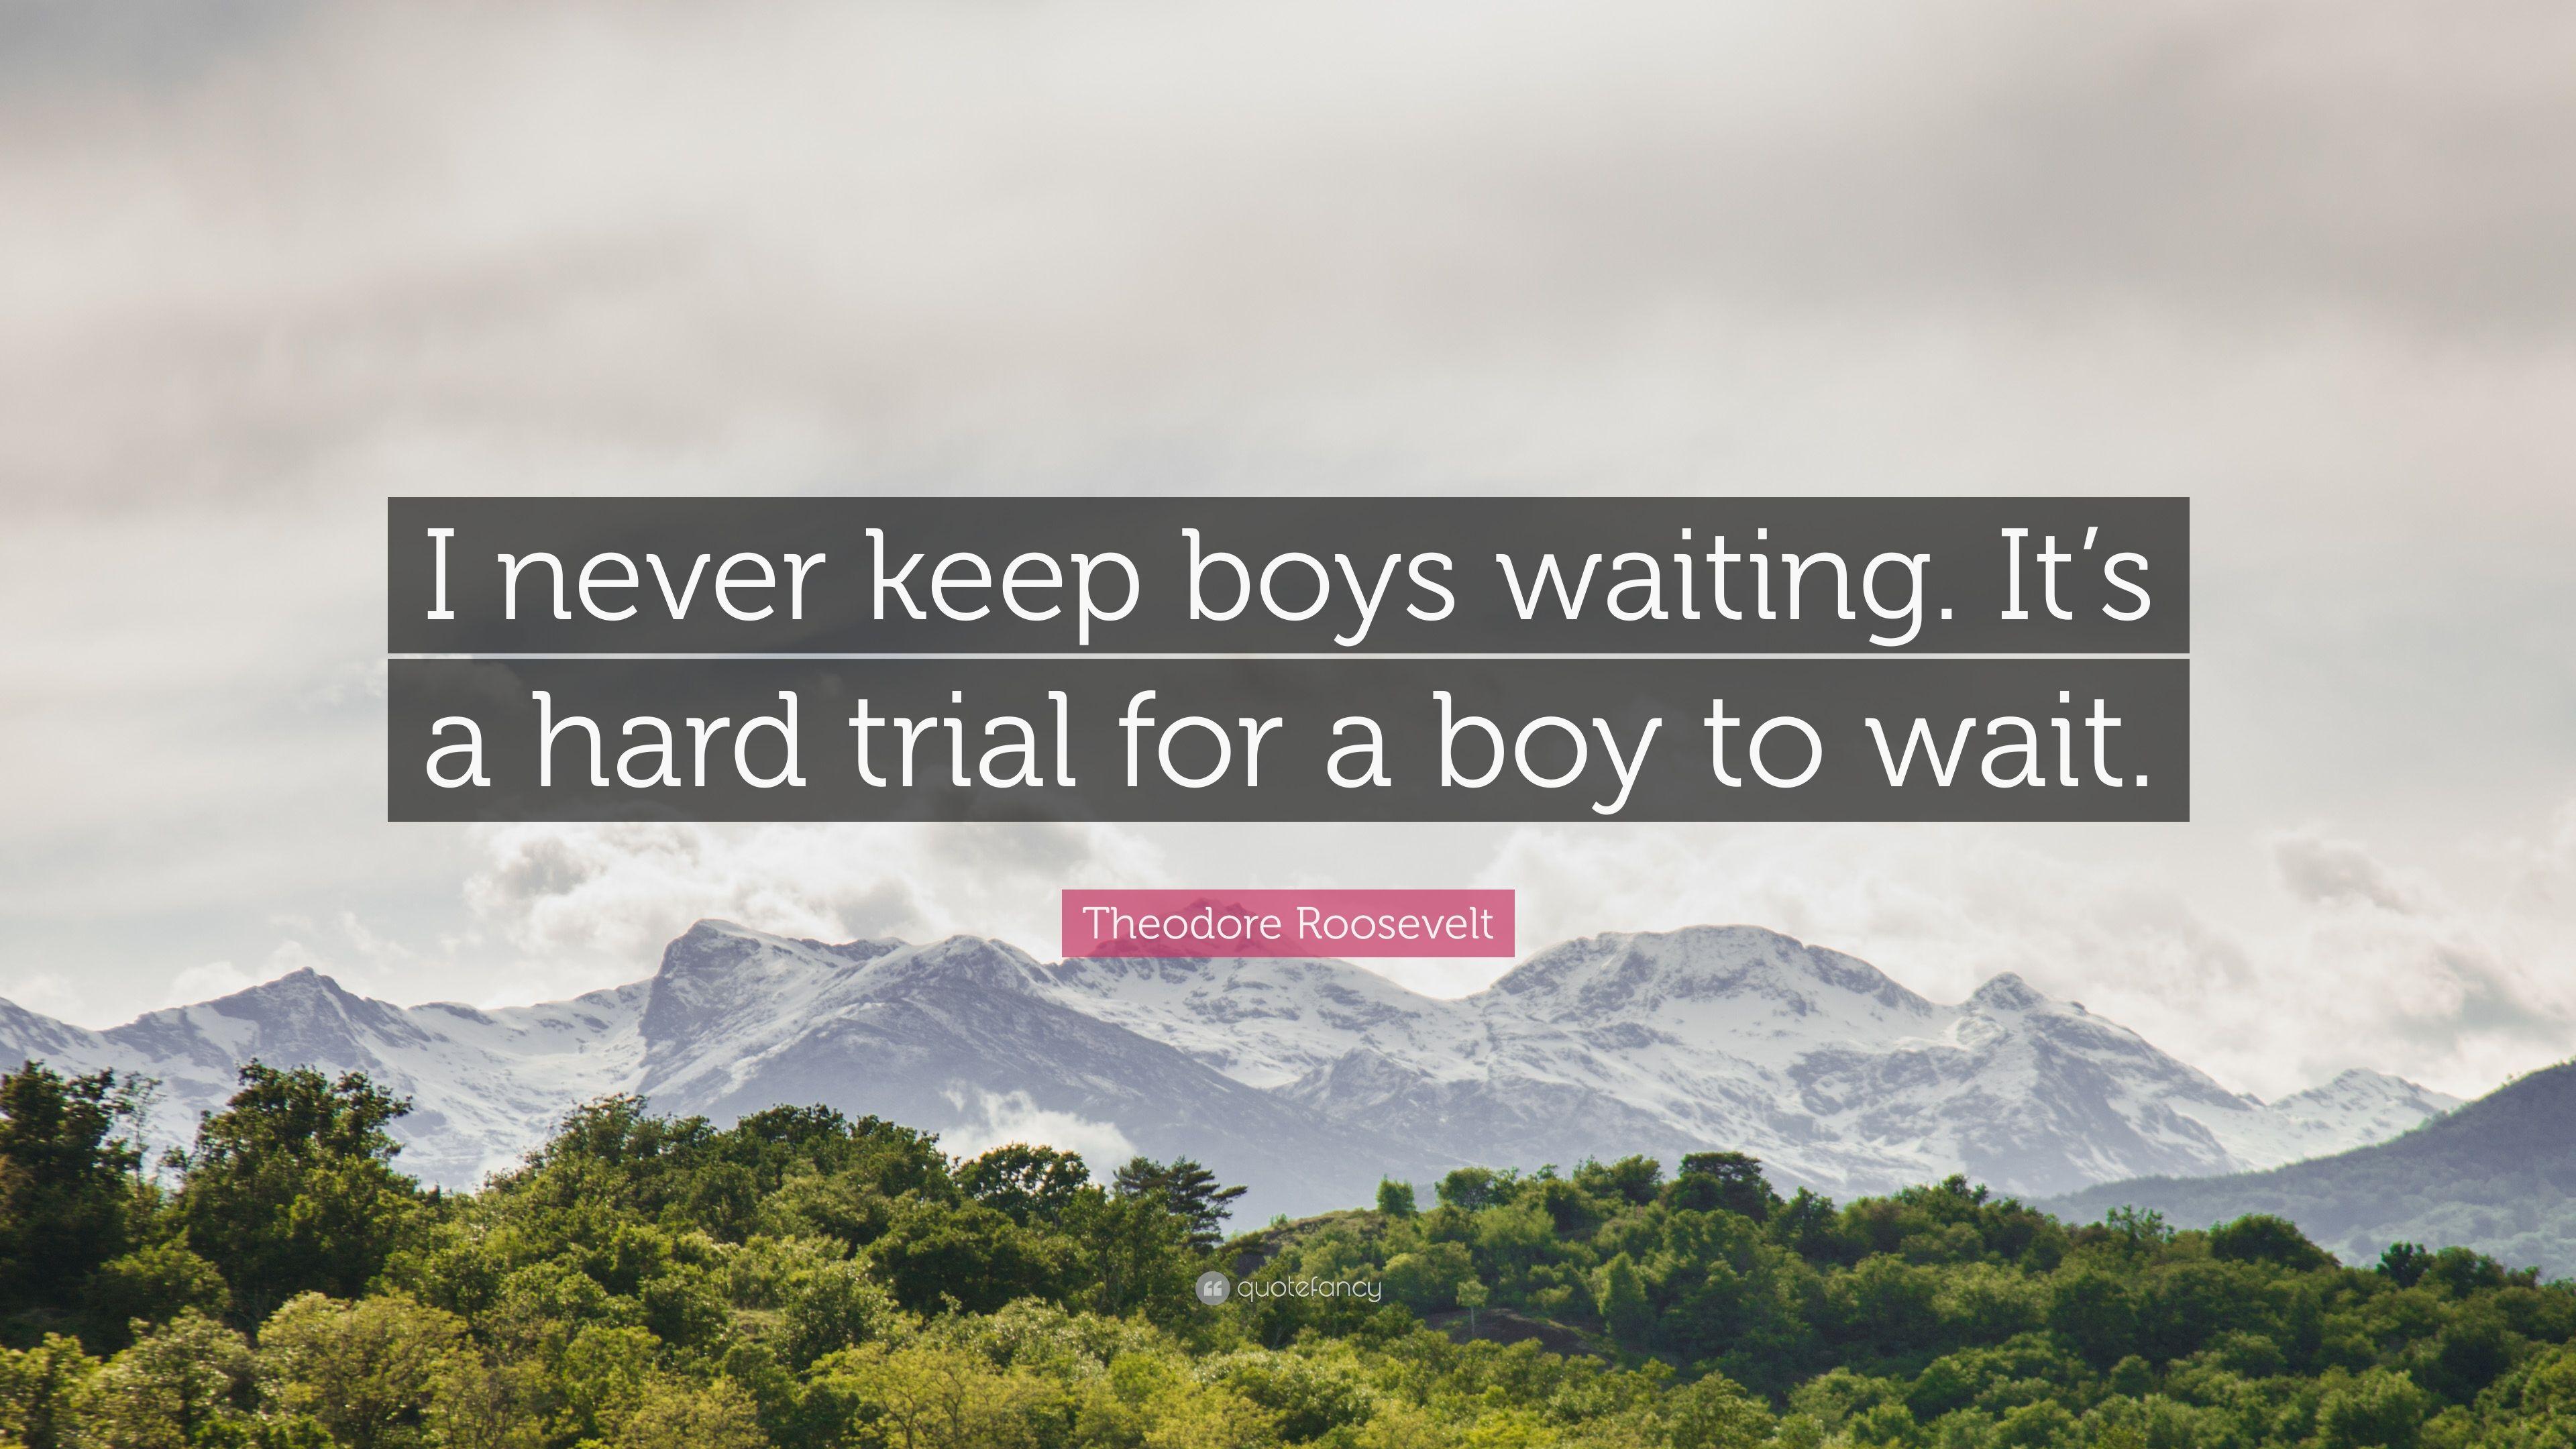 Theodore Roosevelt Quote: “I never keep boys waiting. It's a hard